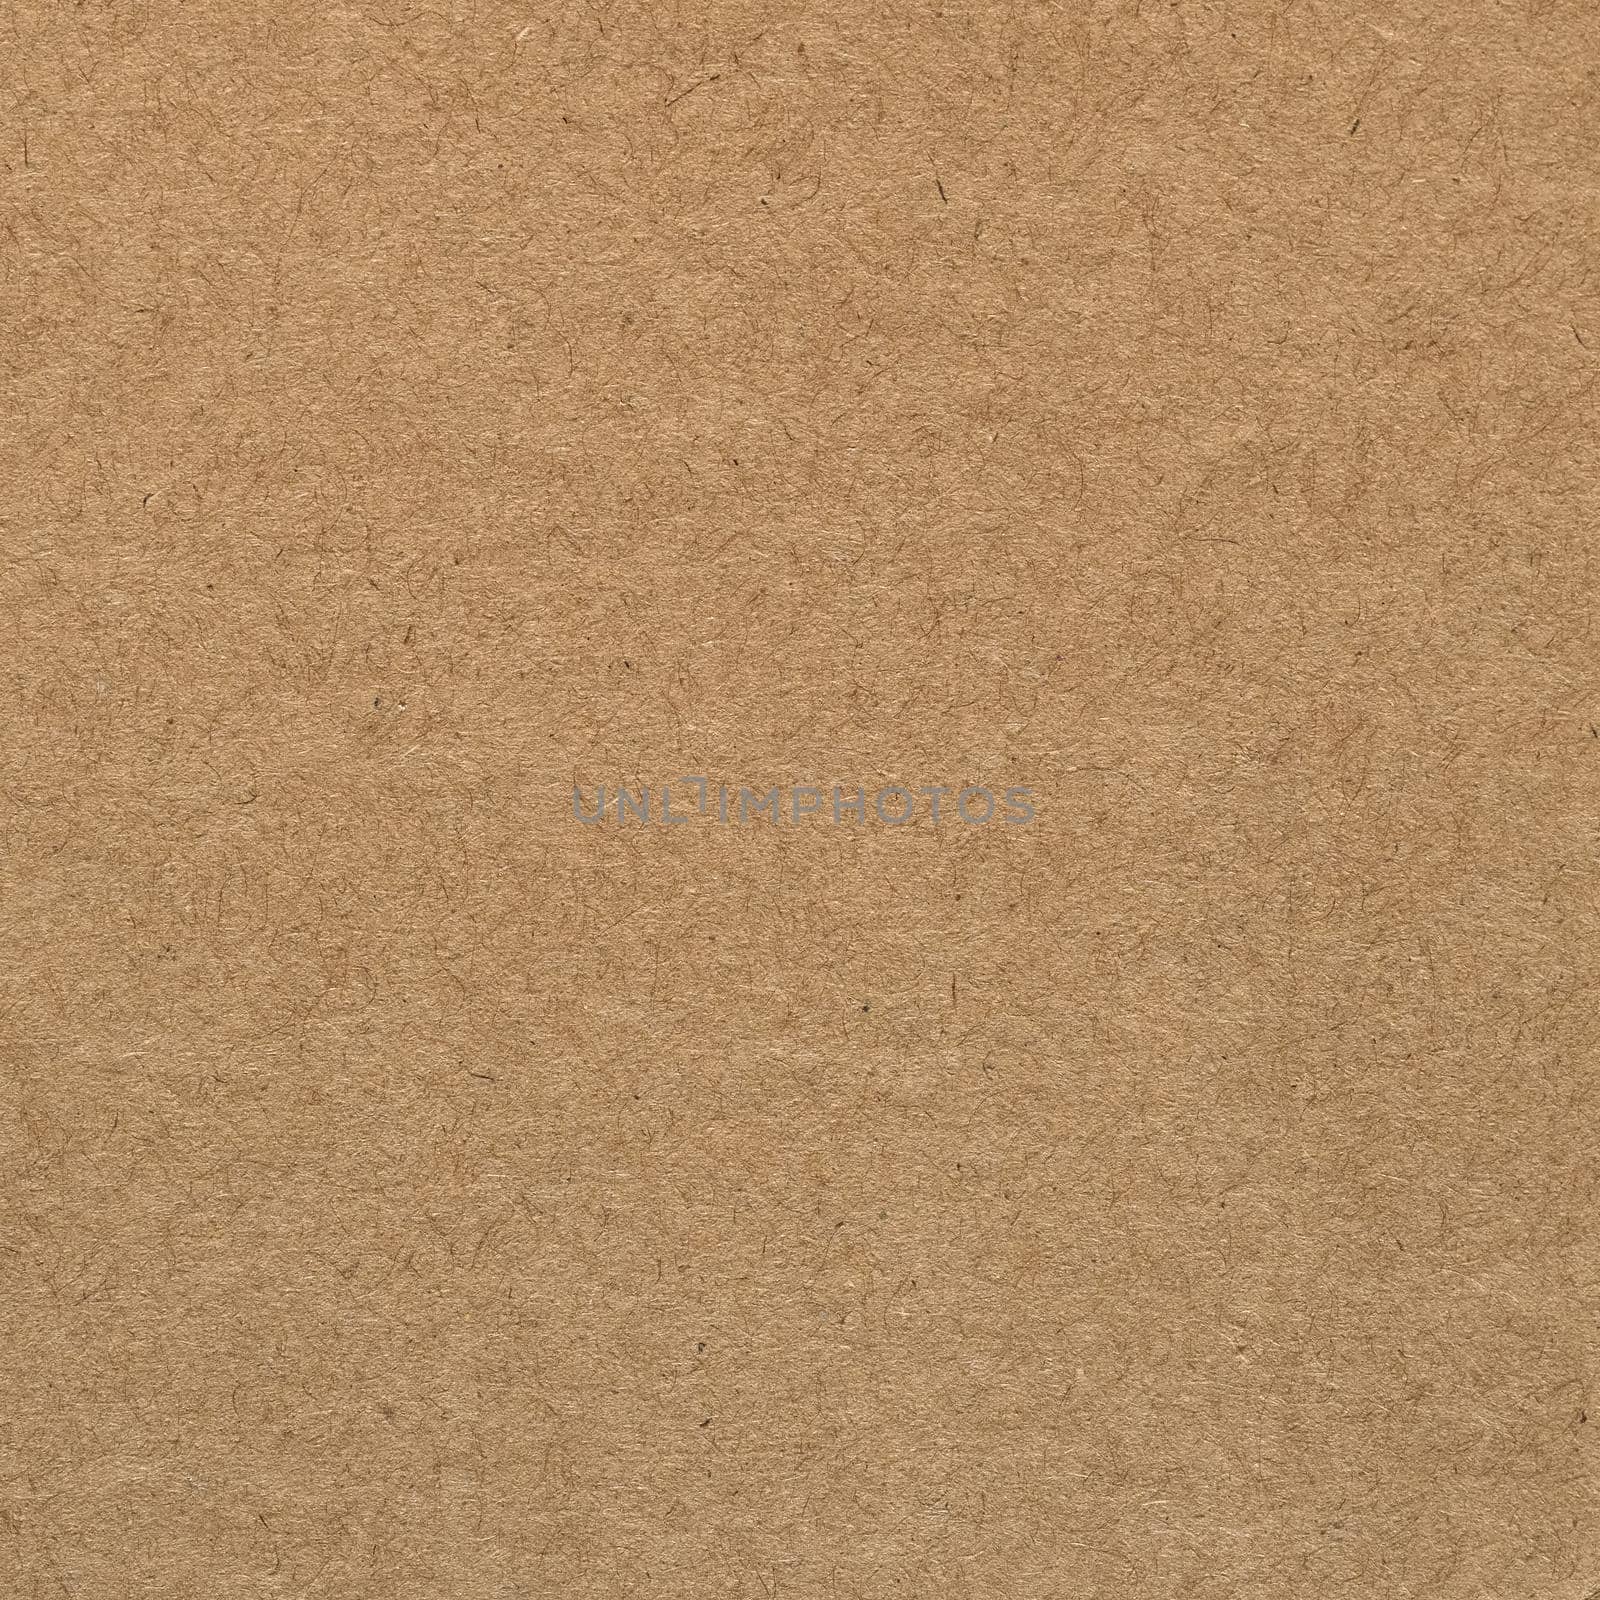 brown corrugated cardboard texture useful as a background